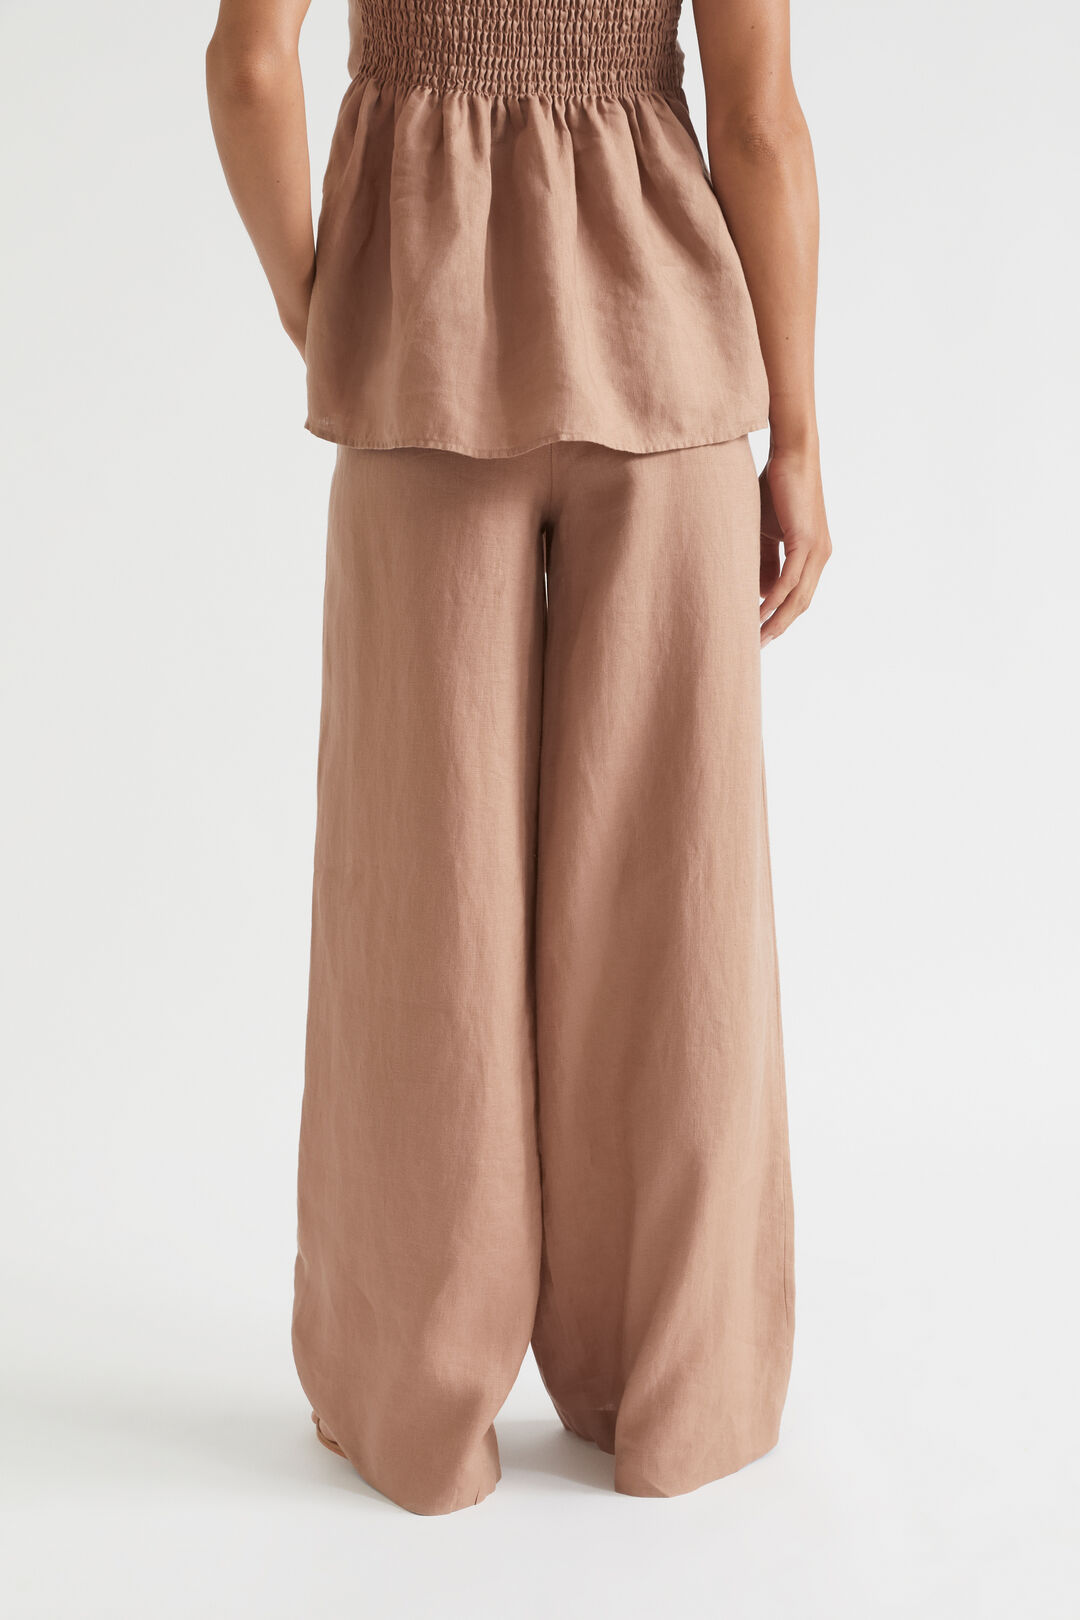 Core Linen Waisted Pant  Rose Taupe  hi-res